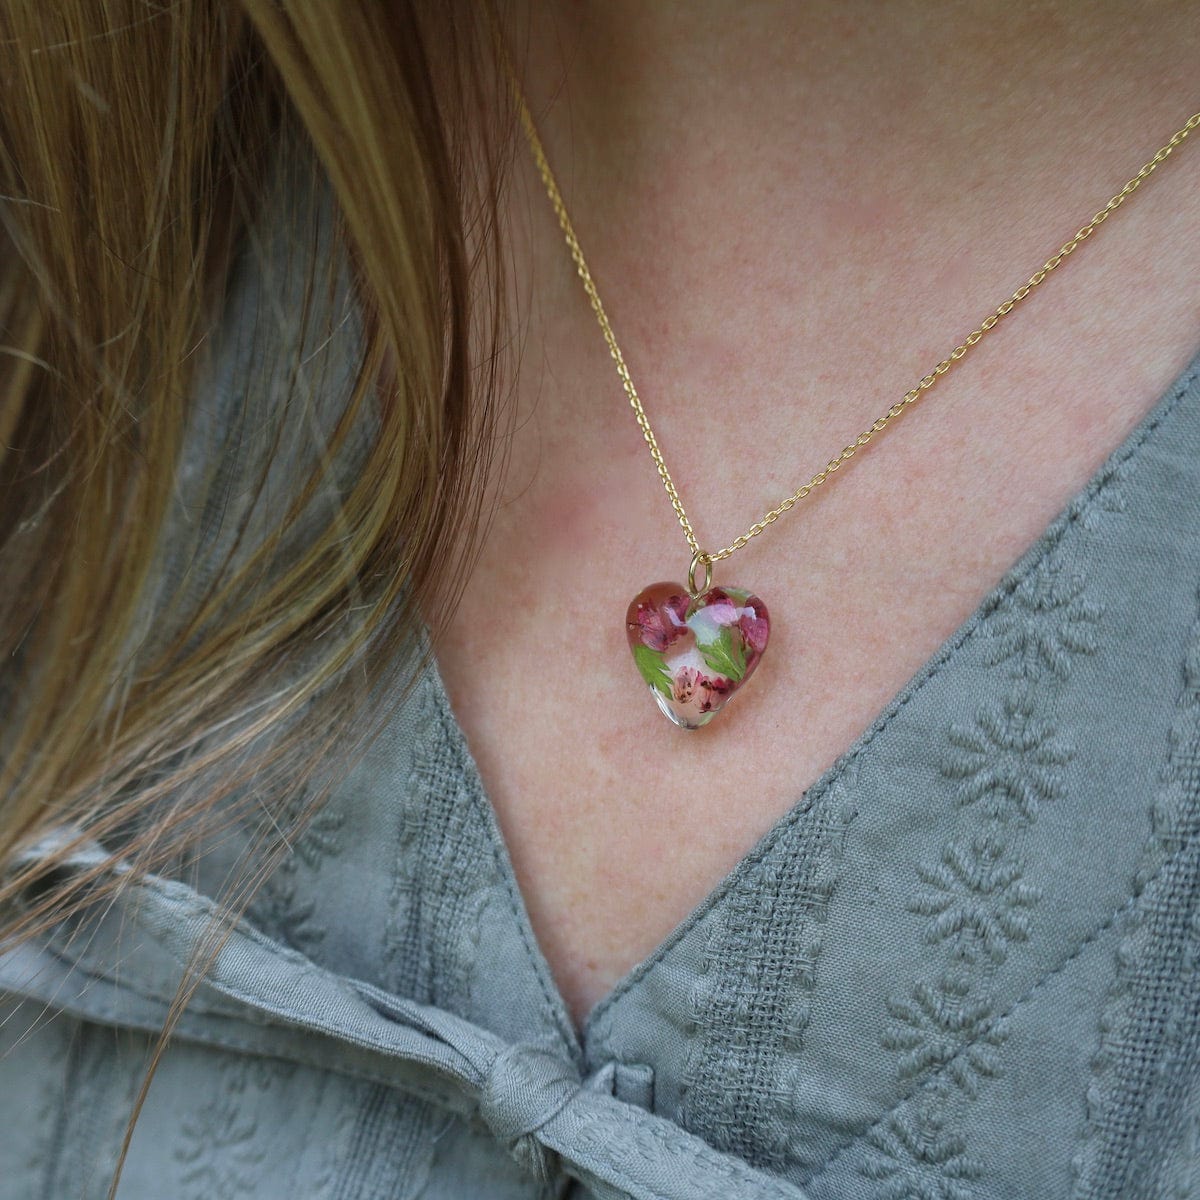 NKL-GPL Botanical Mini Heart Necklace - Cosmos, Pink-A-Boo Camellia October Birthday